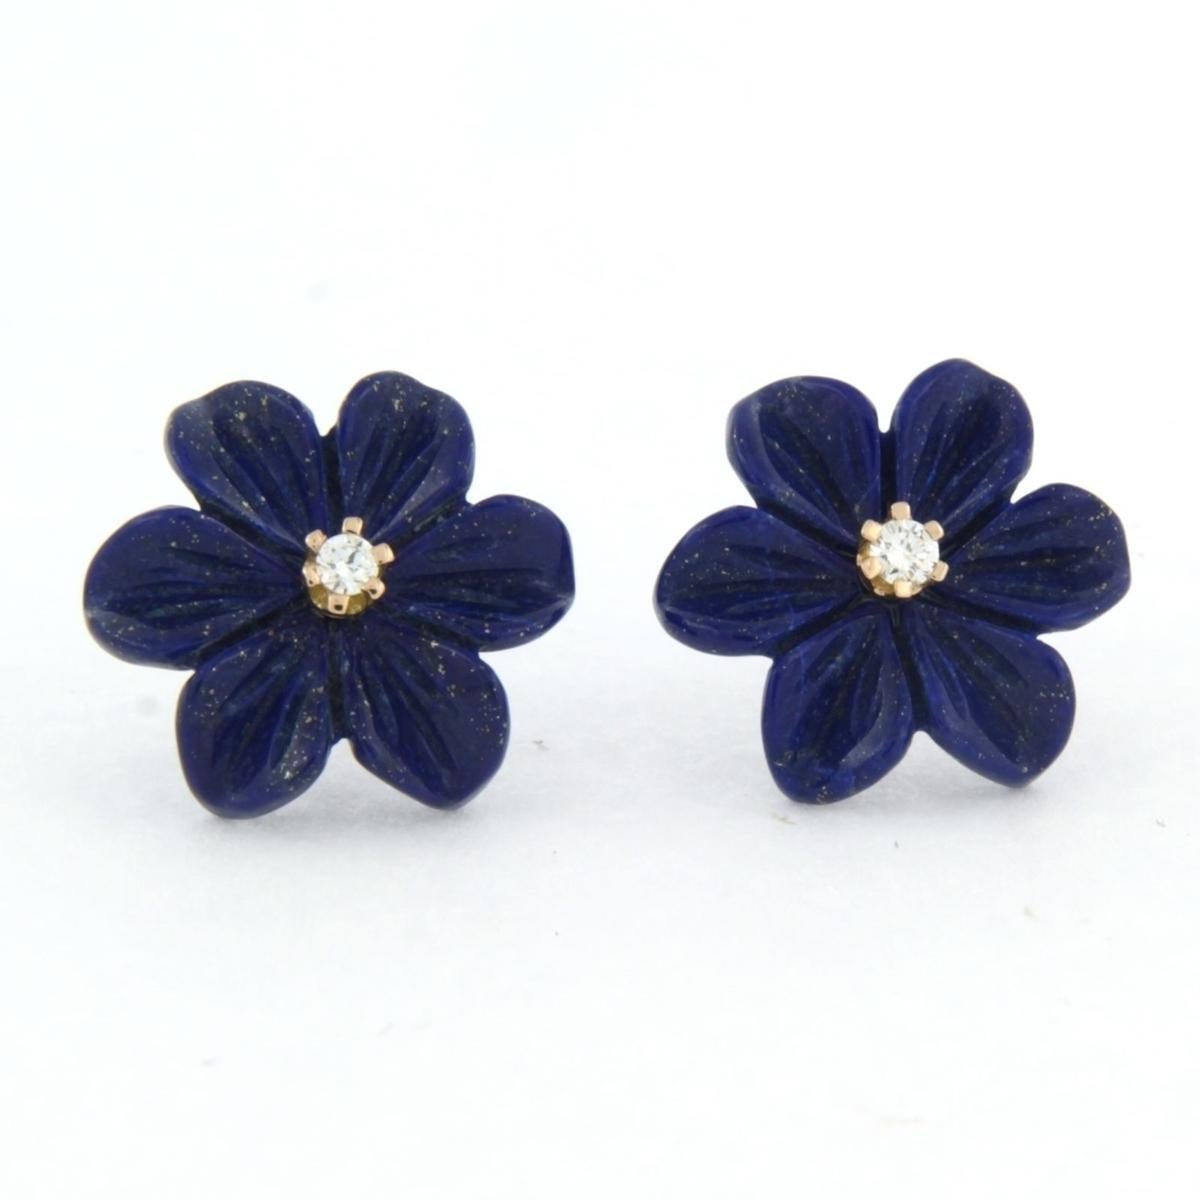 18 kt pink gold ear studs with flower shaped lapis lazuli and brilliant cut diamond 0.08 ct - G/H - VS/SI

detailed description:

the size of the ear stud has a diameter of 1.4 cm

Total weight 2.9 grams

put with

- 2 x 1.5 cm flower shape cut